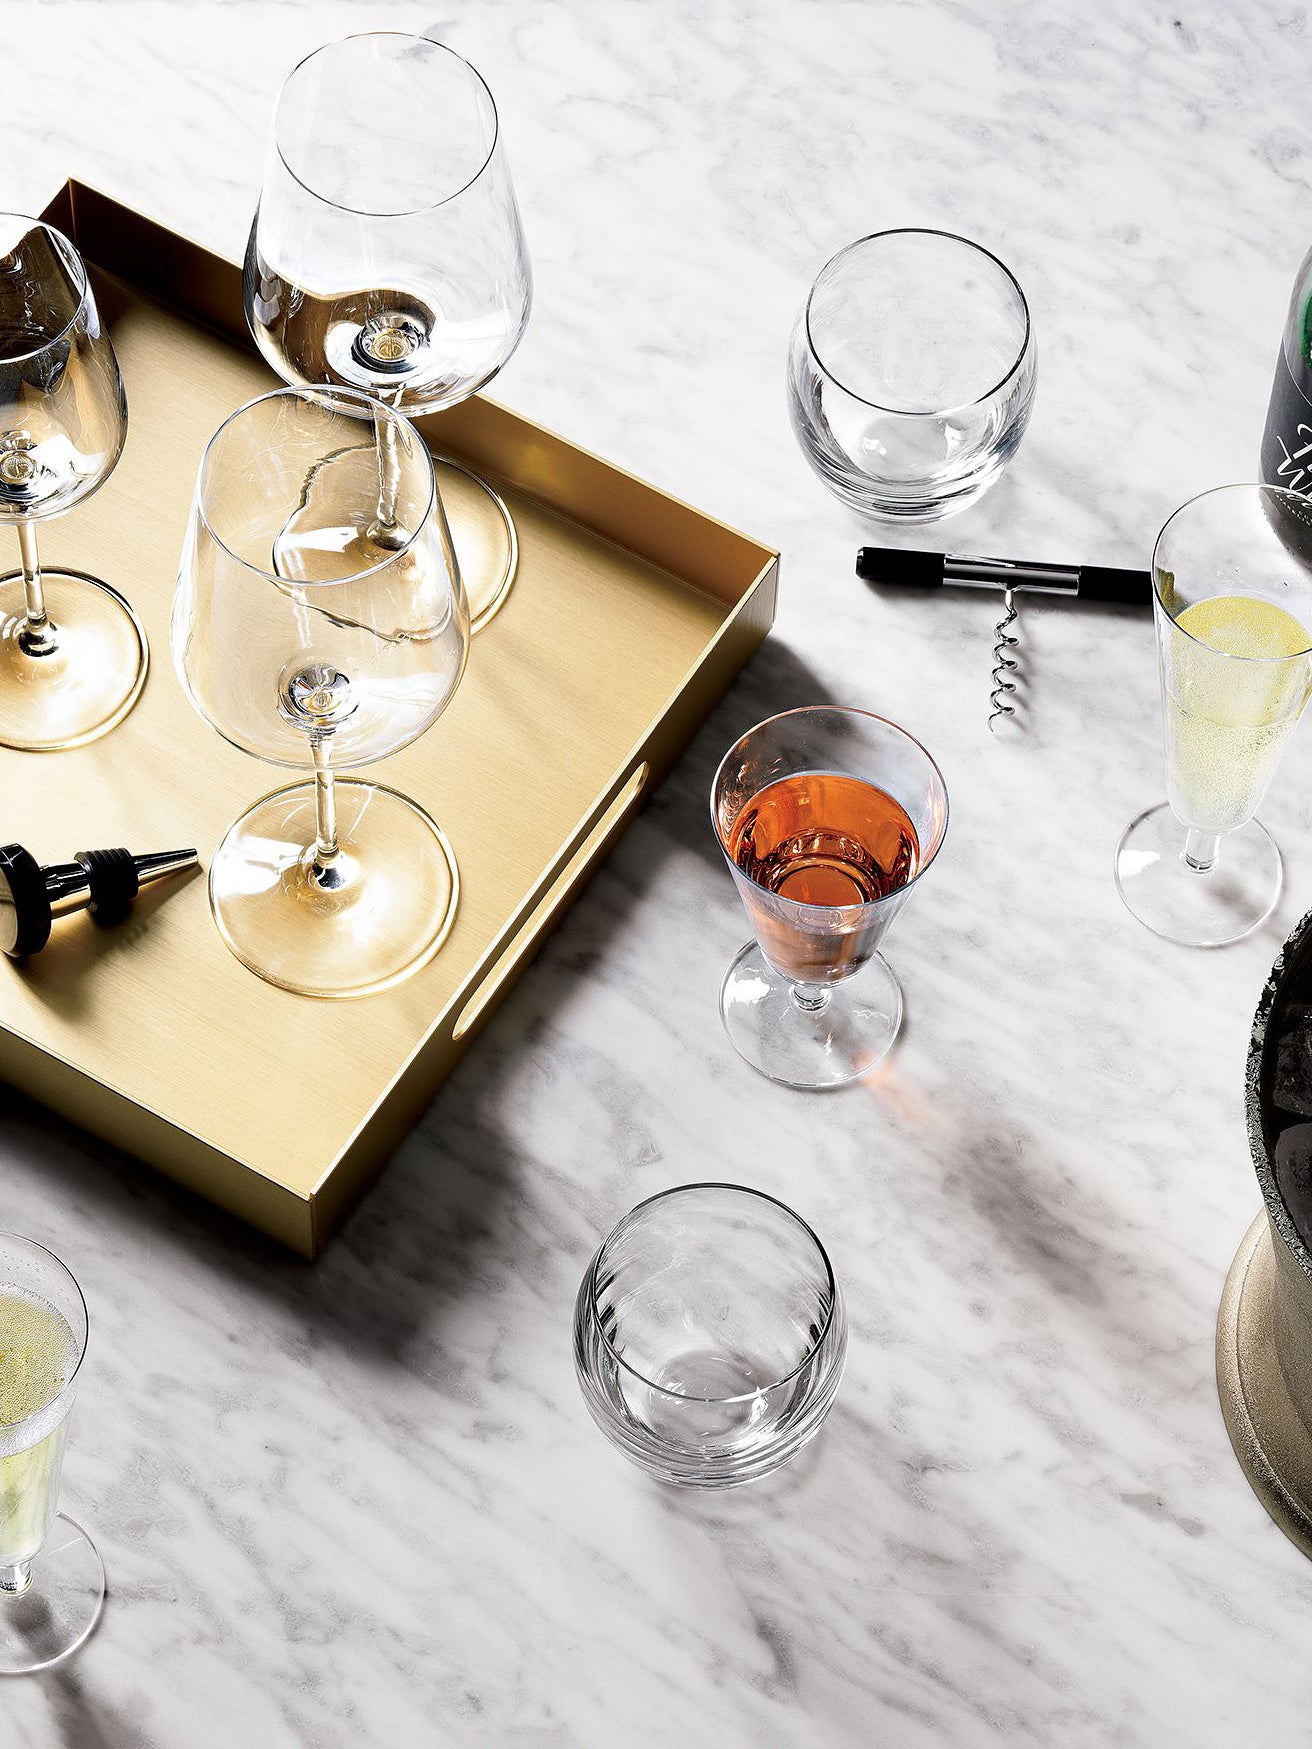 These $6 CB2 Wineglasses Are as Good as Their $60 Counterparts